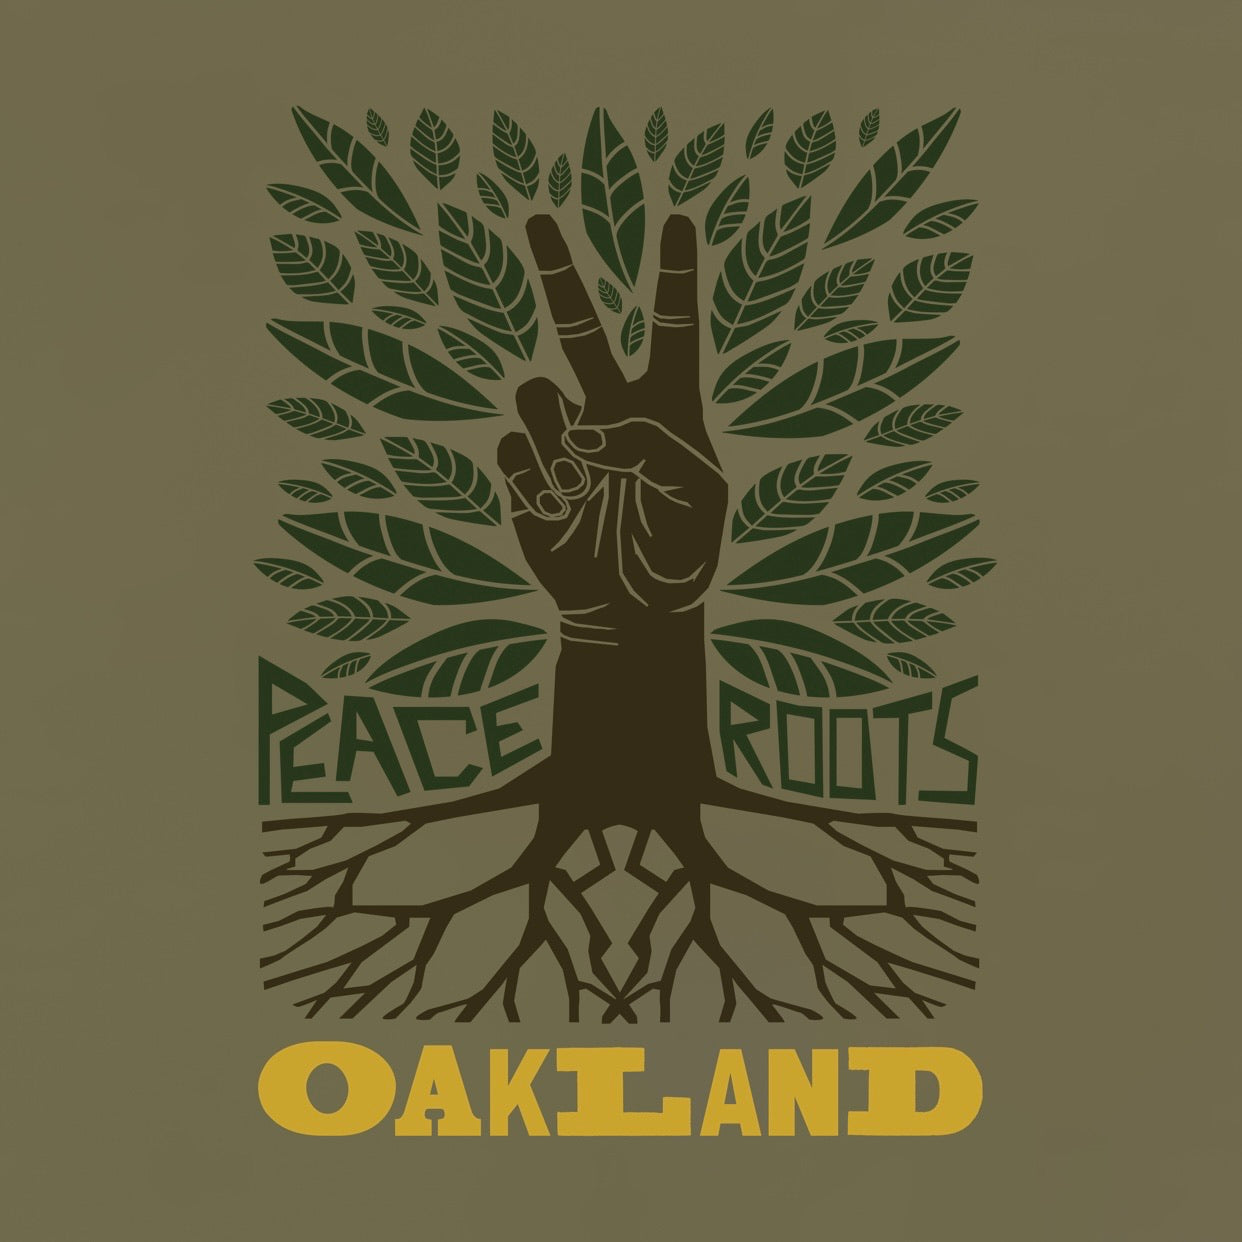 (Preorder) Peace and Roots Reissue